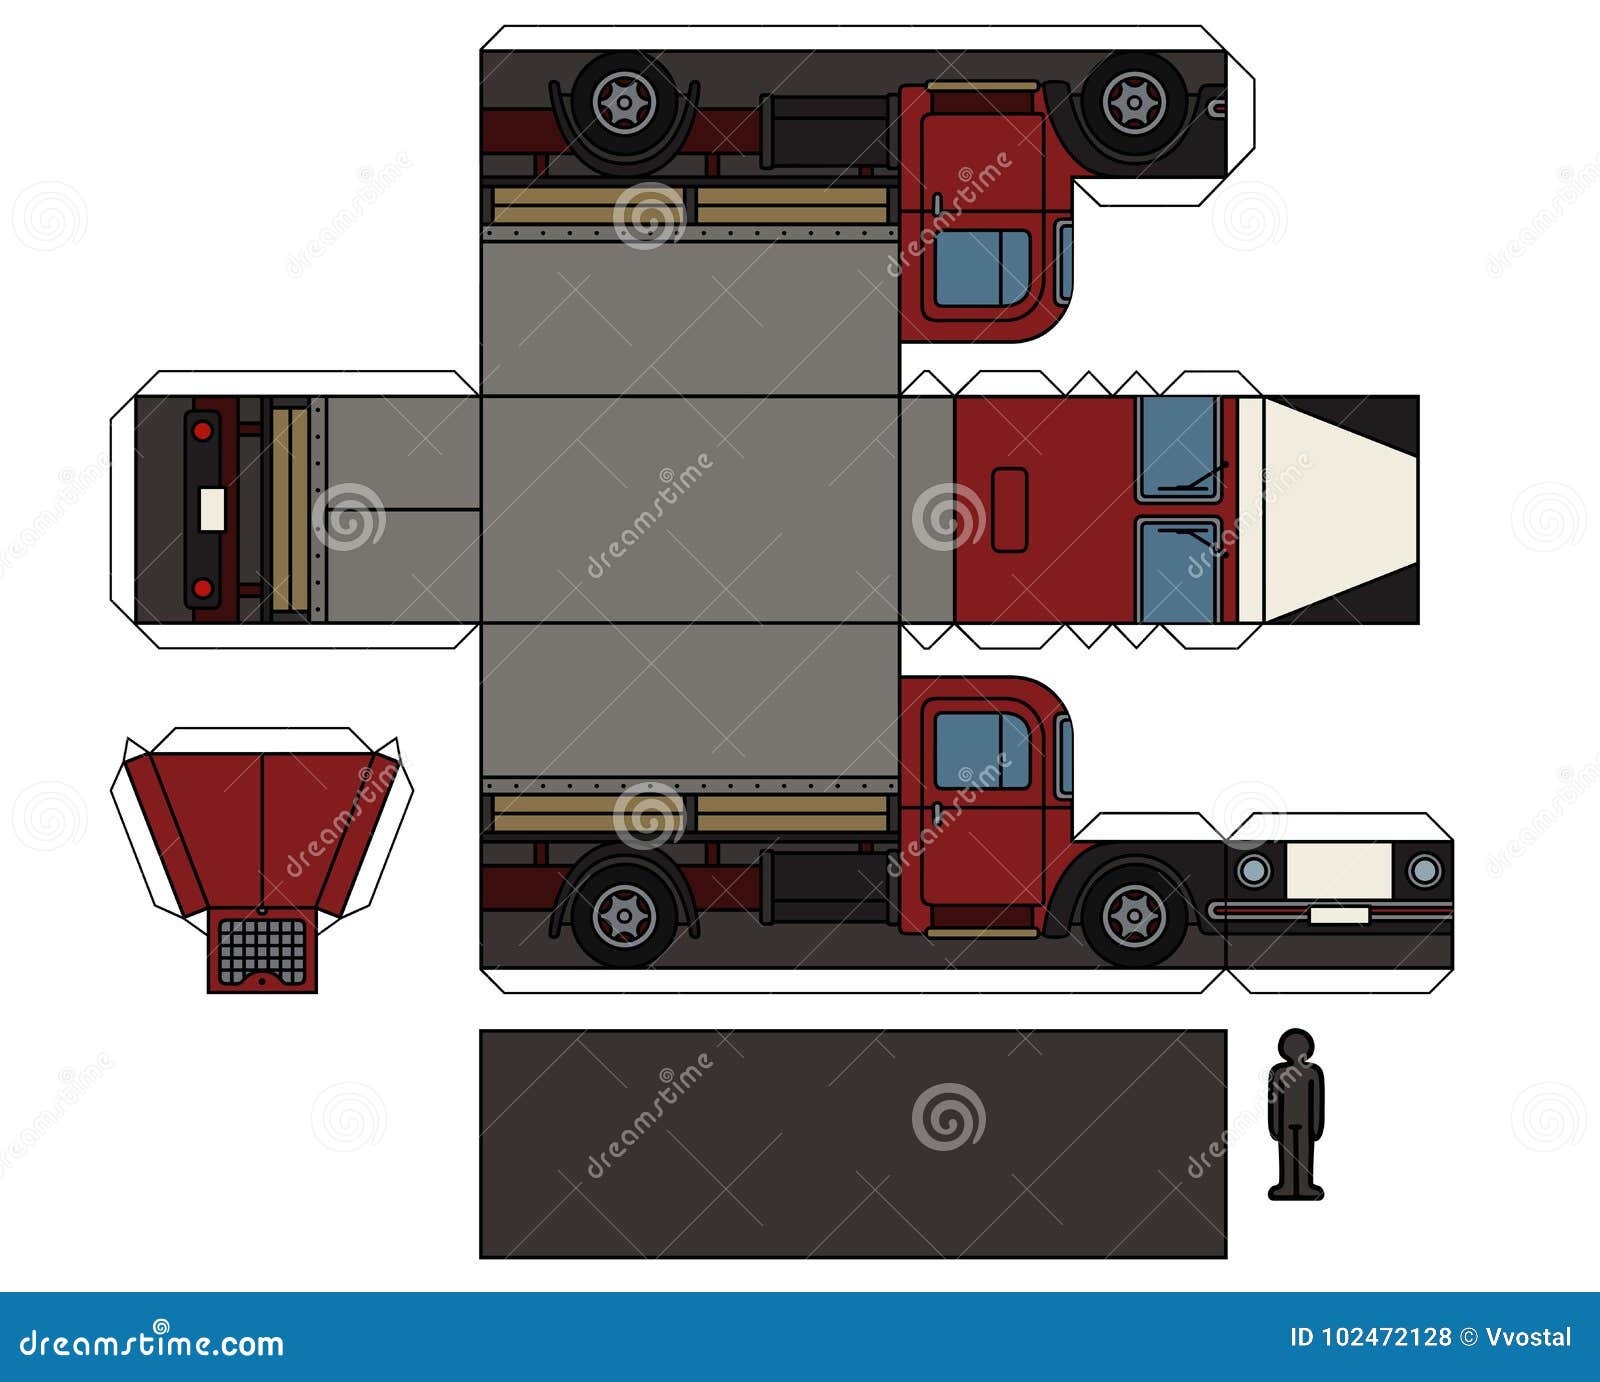 Paper Model Of An Old Truck Stock Vector Illustration Of